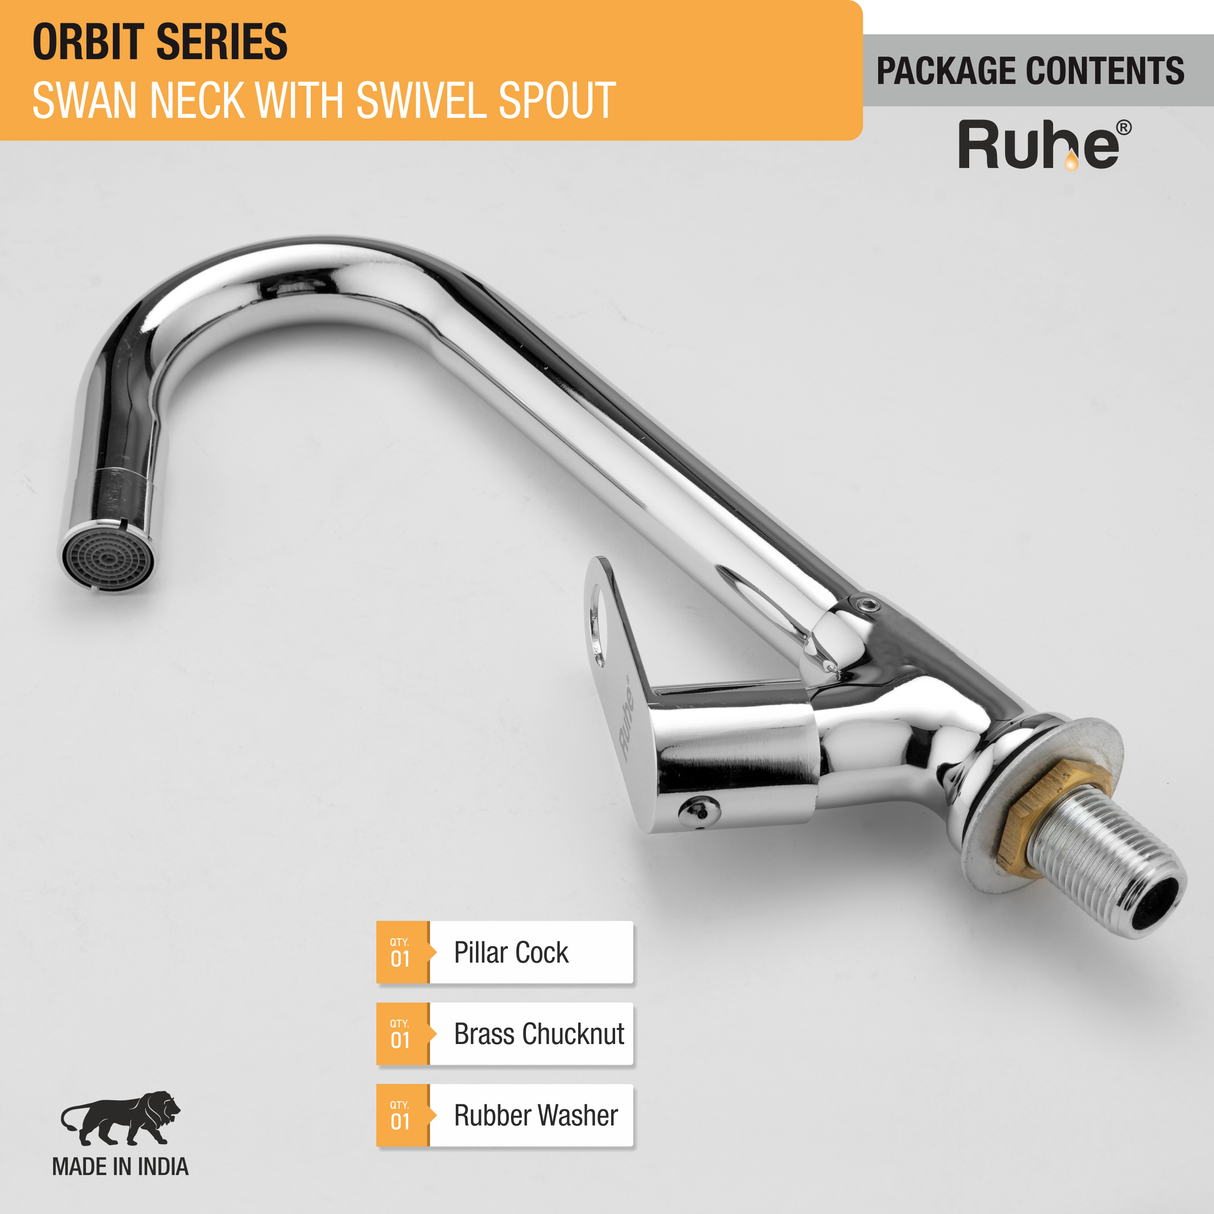 Orbit Swan Neck with Small (12 inches) Round Swivel Spout Brass Faucet package content